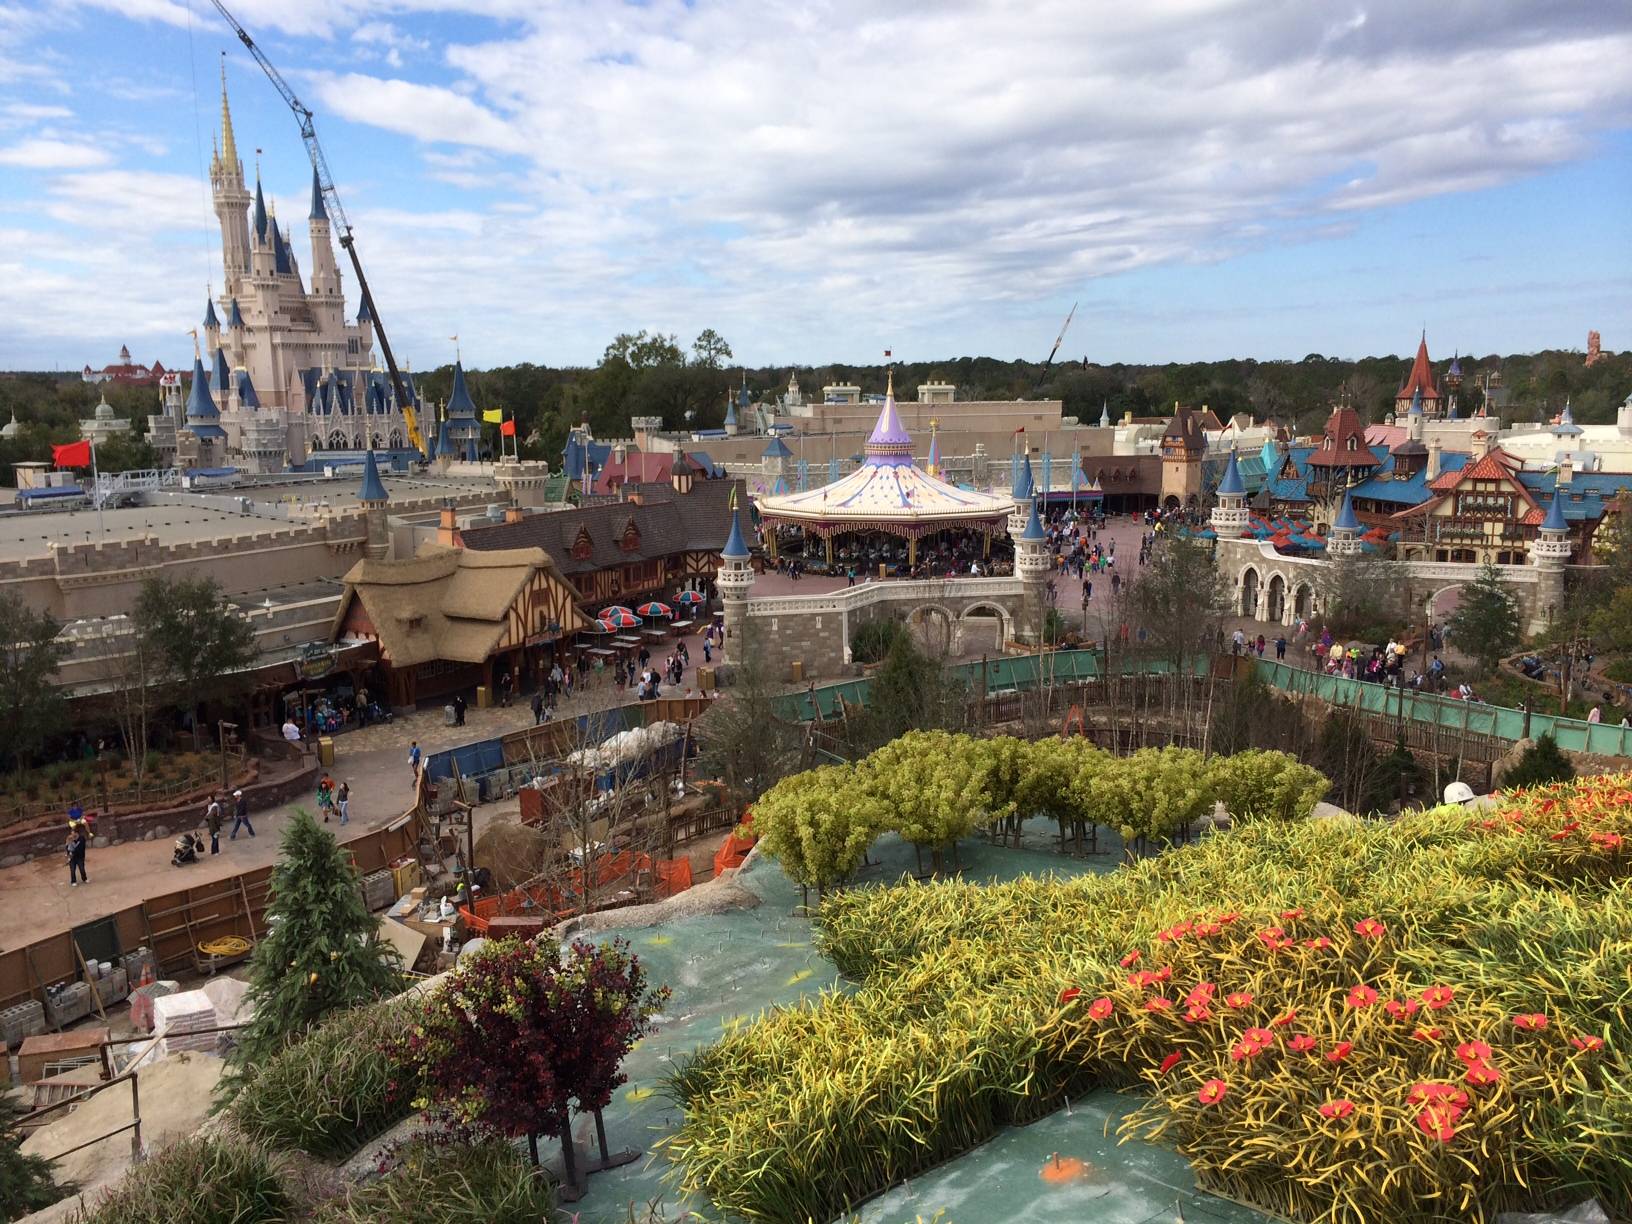 View from the top of the Seven Dwarfs Mine Train